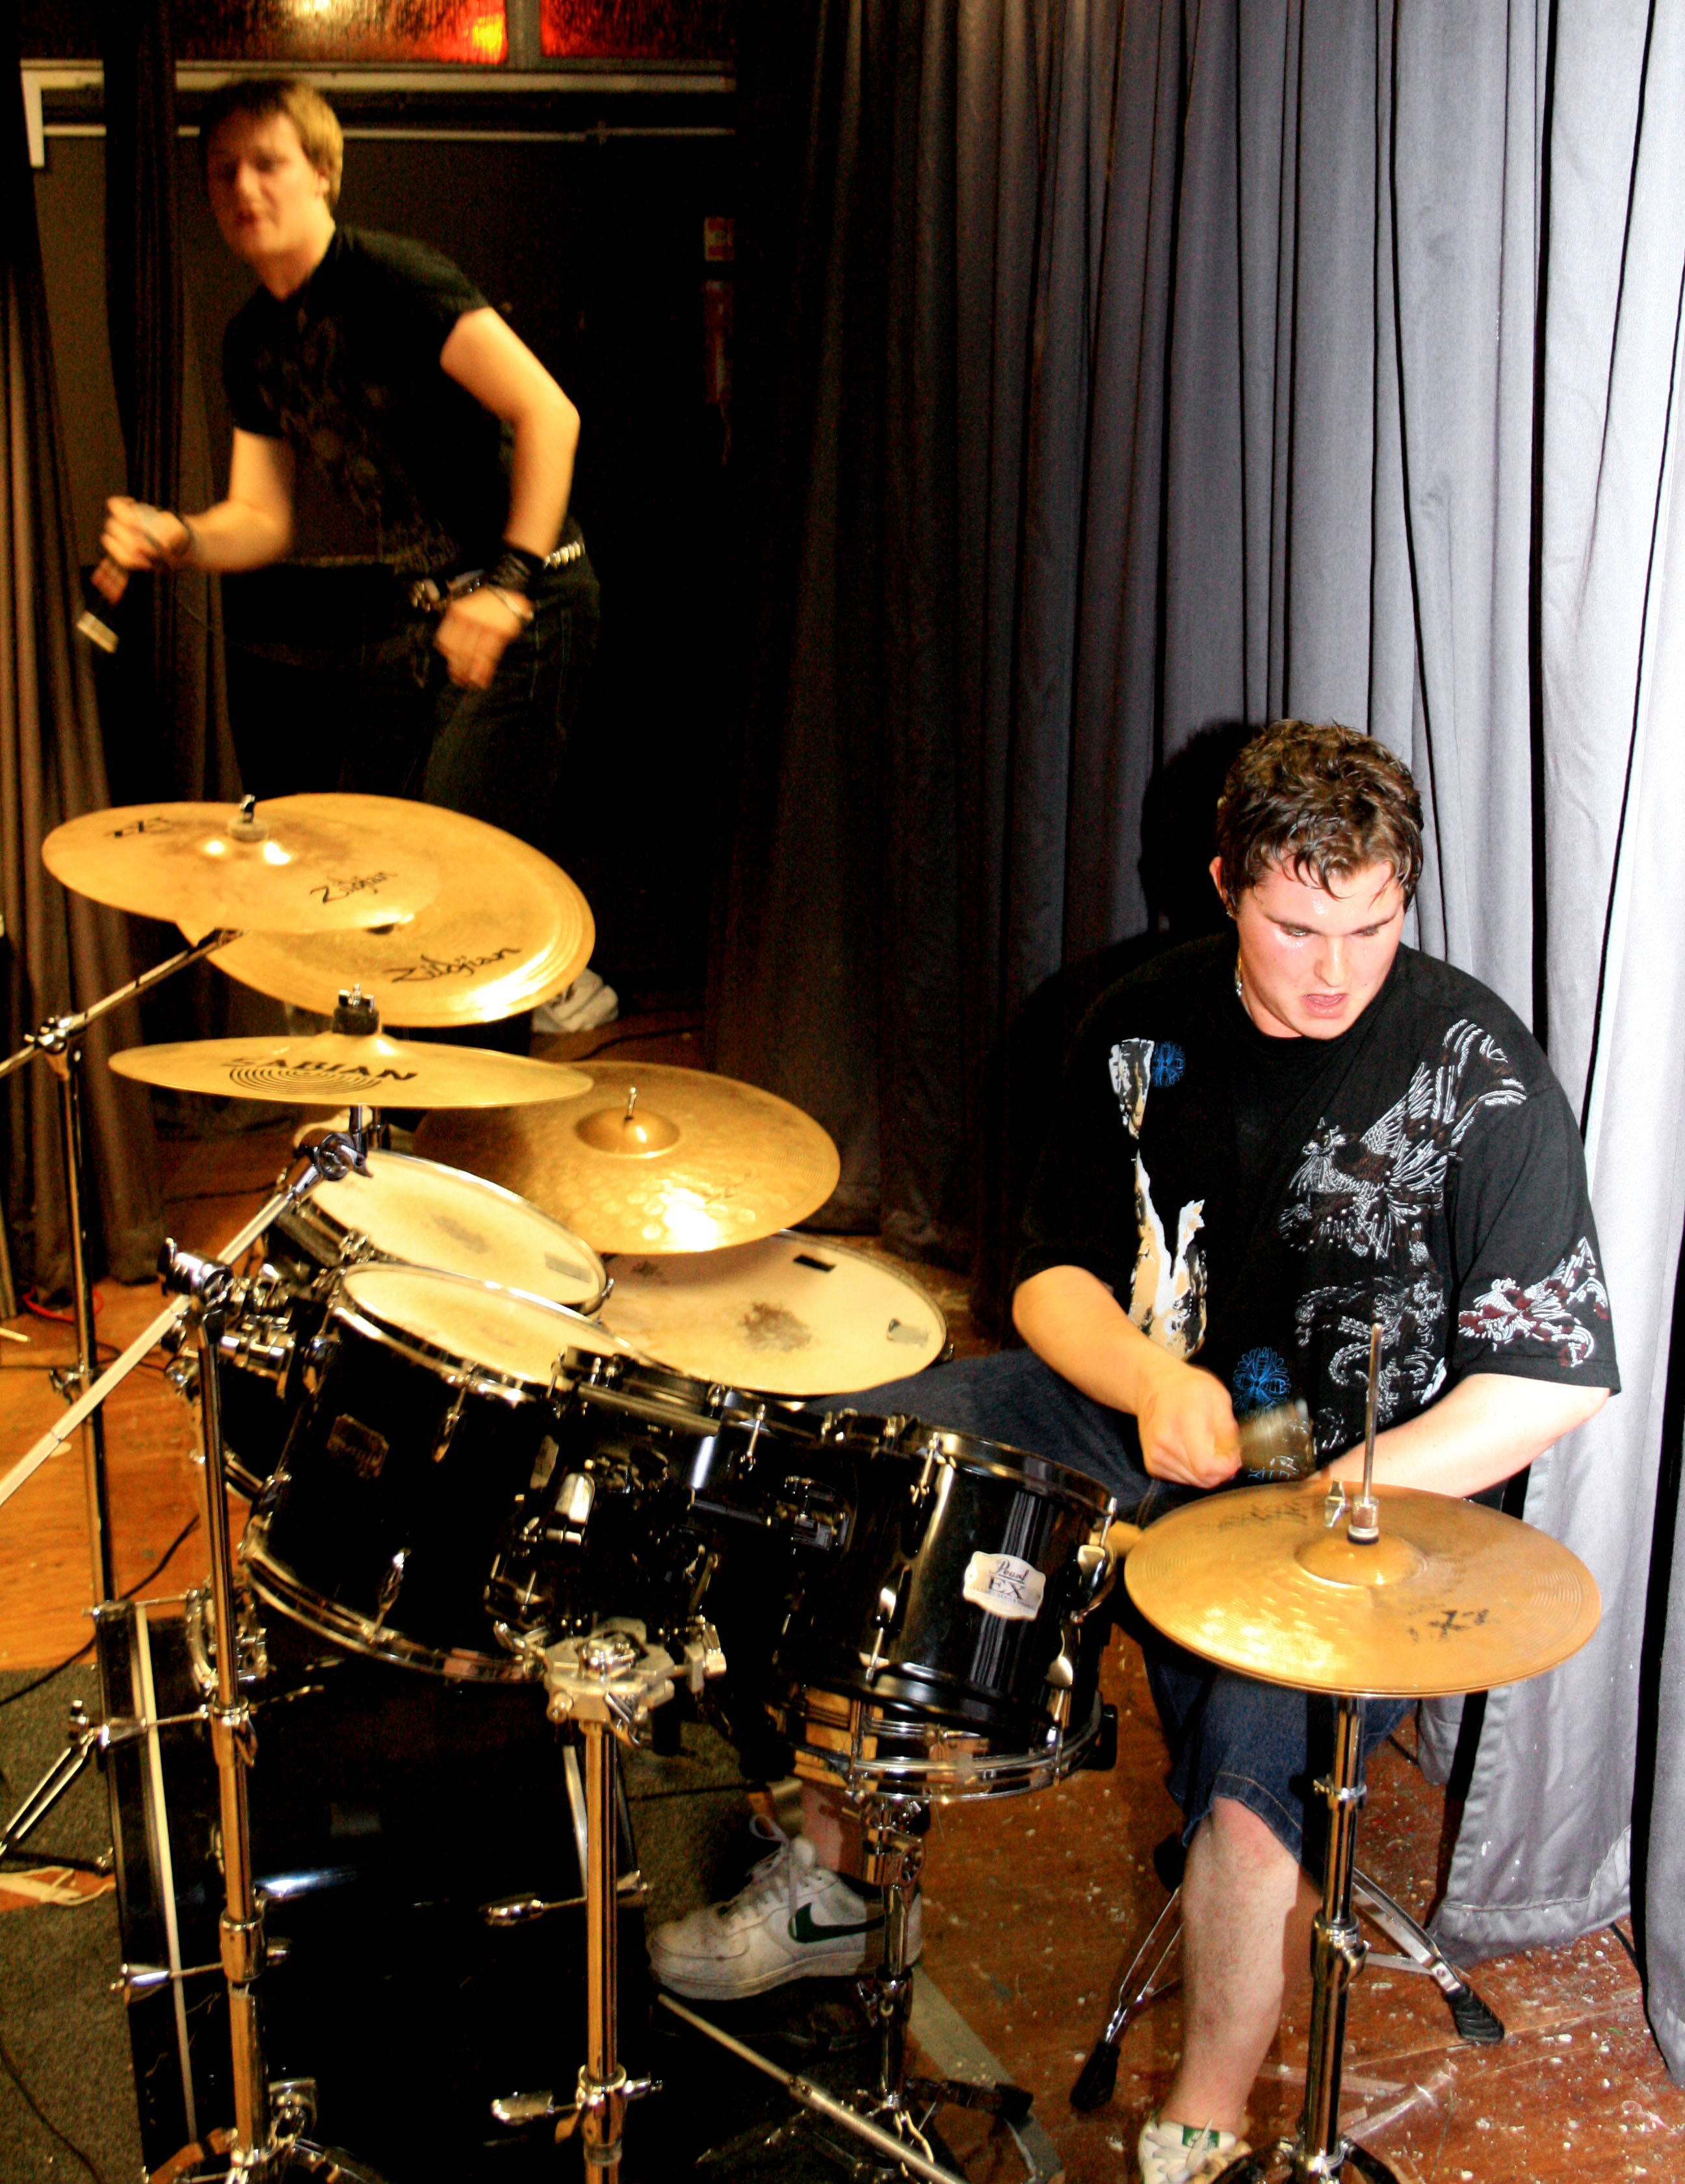 File:Hollow Limt Metal Band Drummer.JPG - Wikimedia Commons